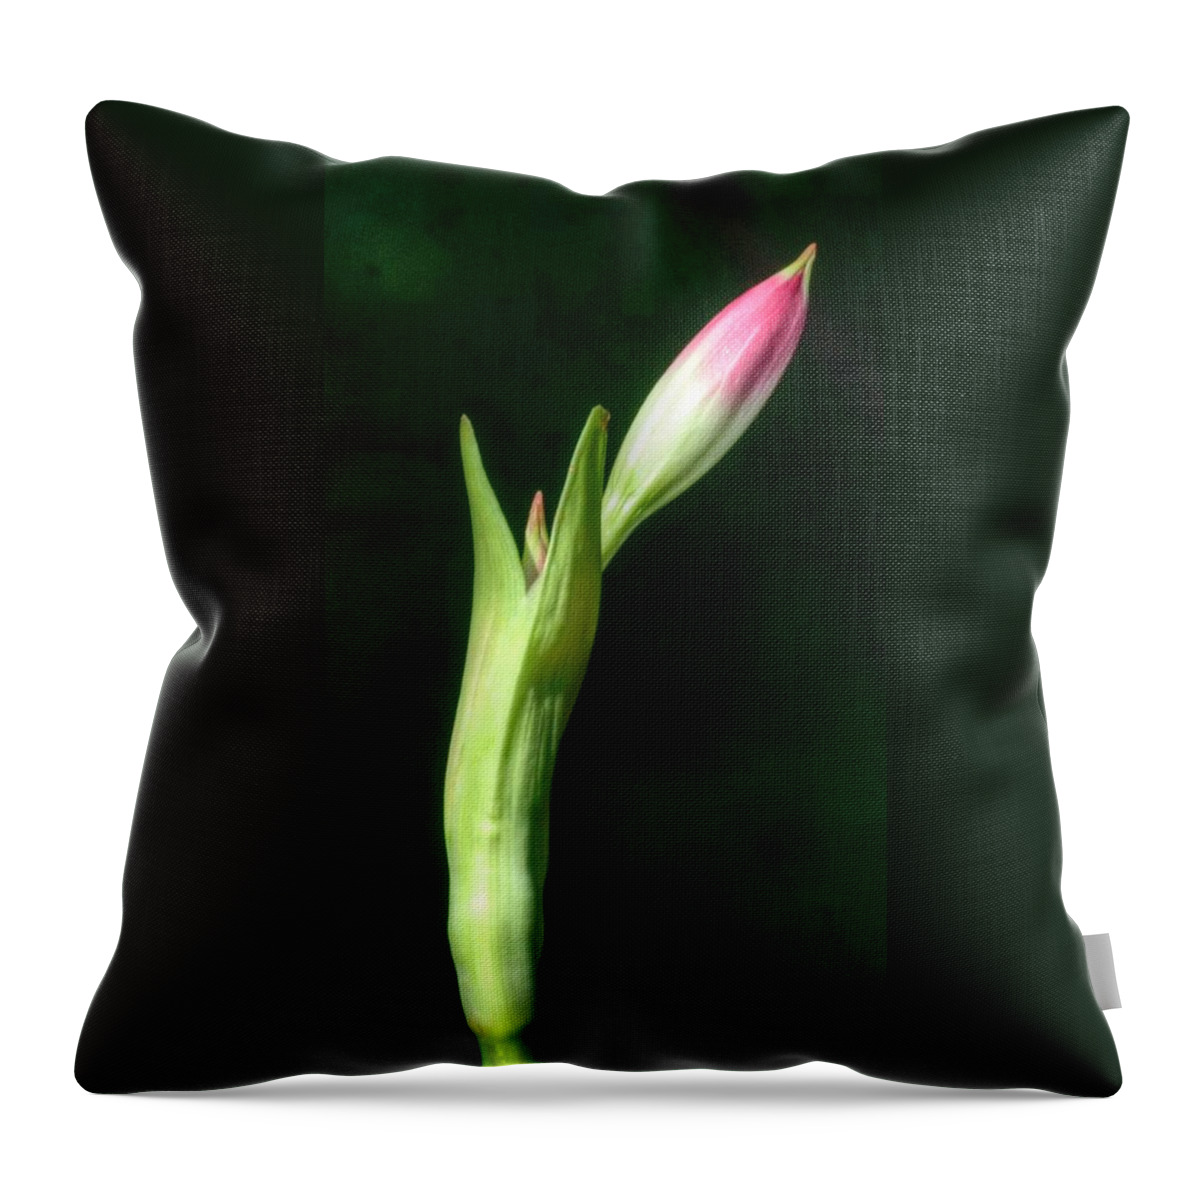 Budding Flower Throw Pillow featuring the photograph Slender Bud by Richard Omura